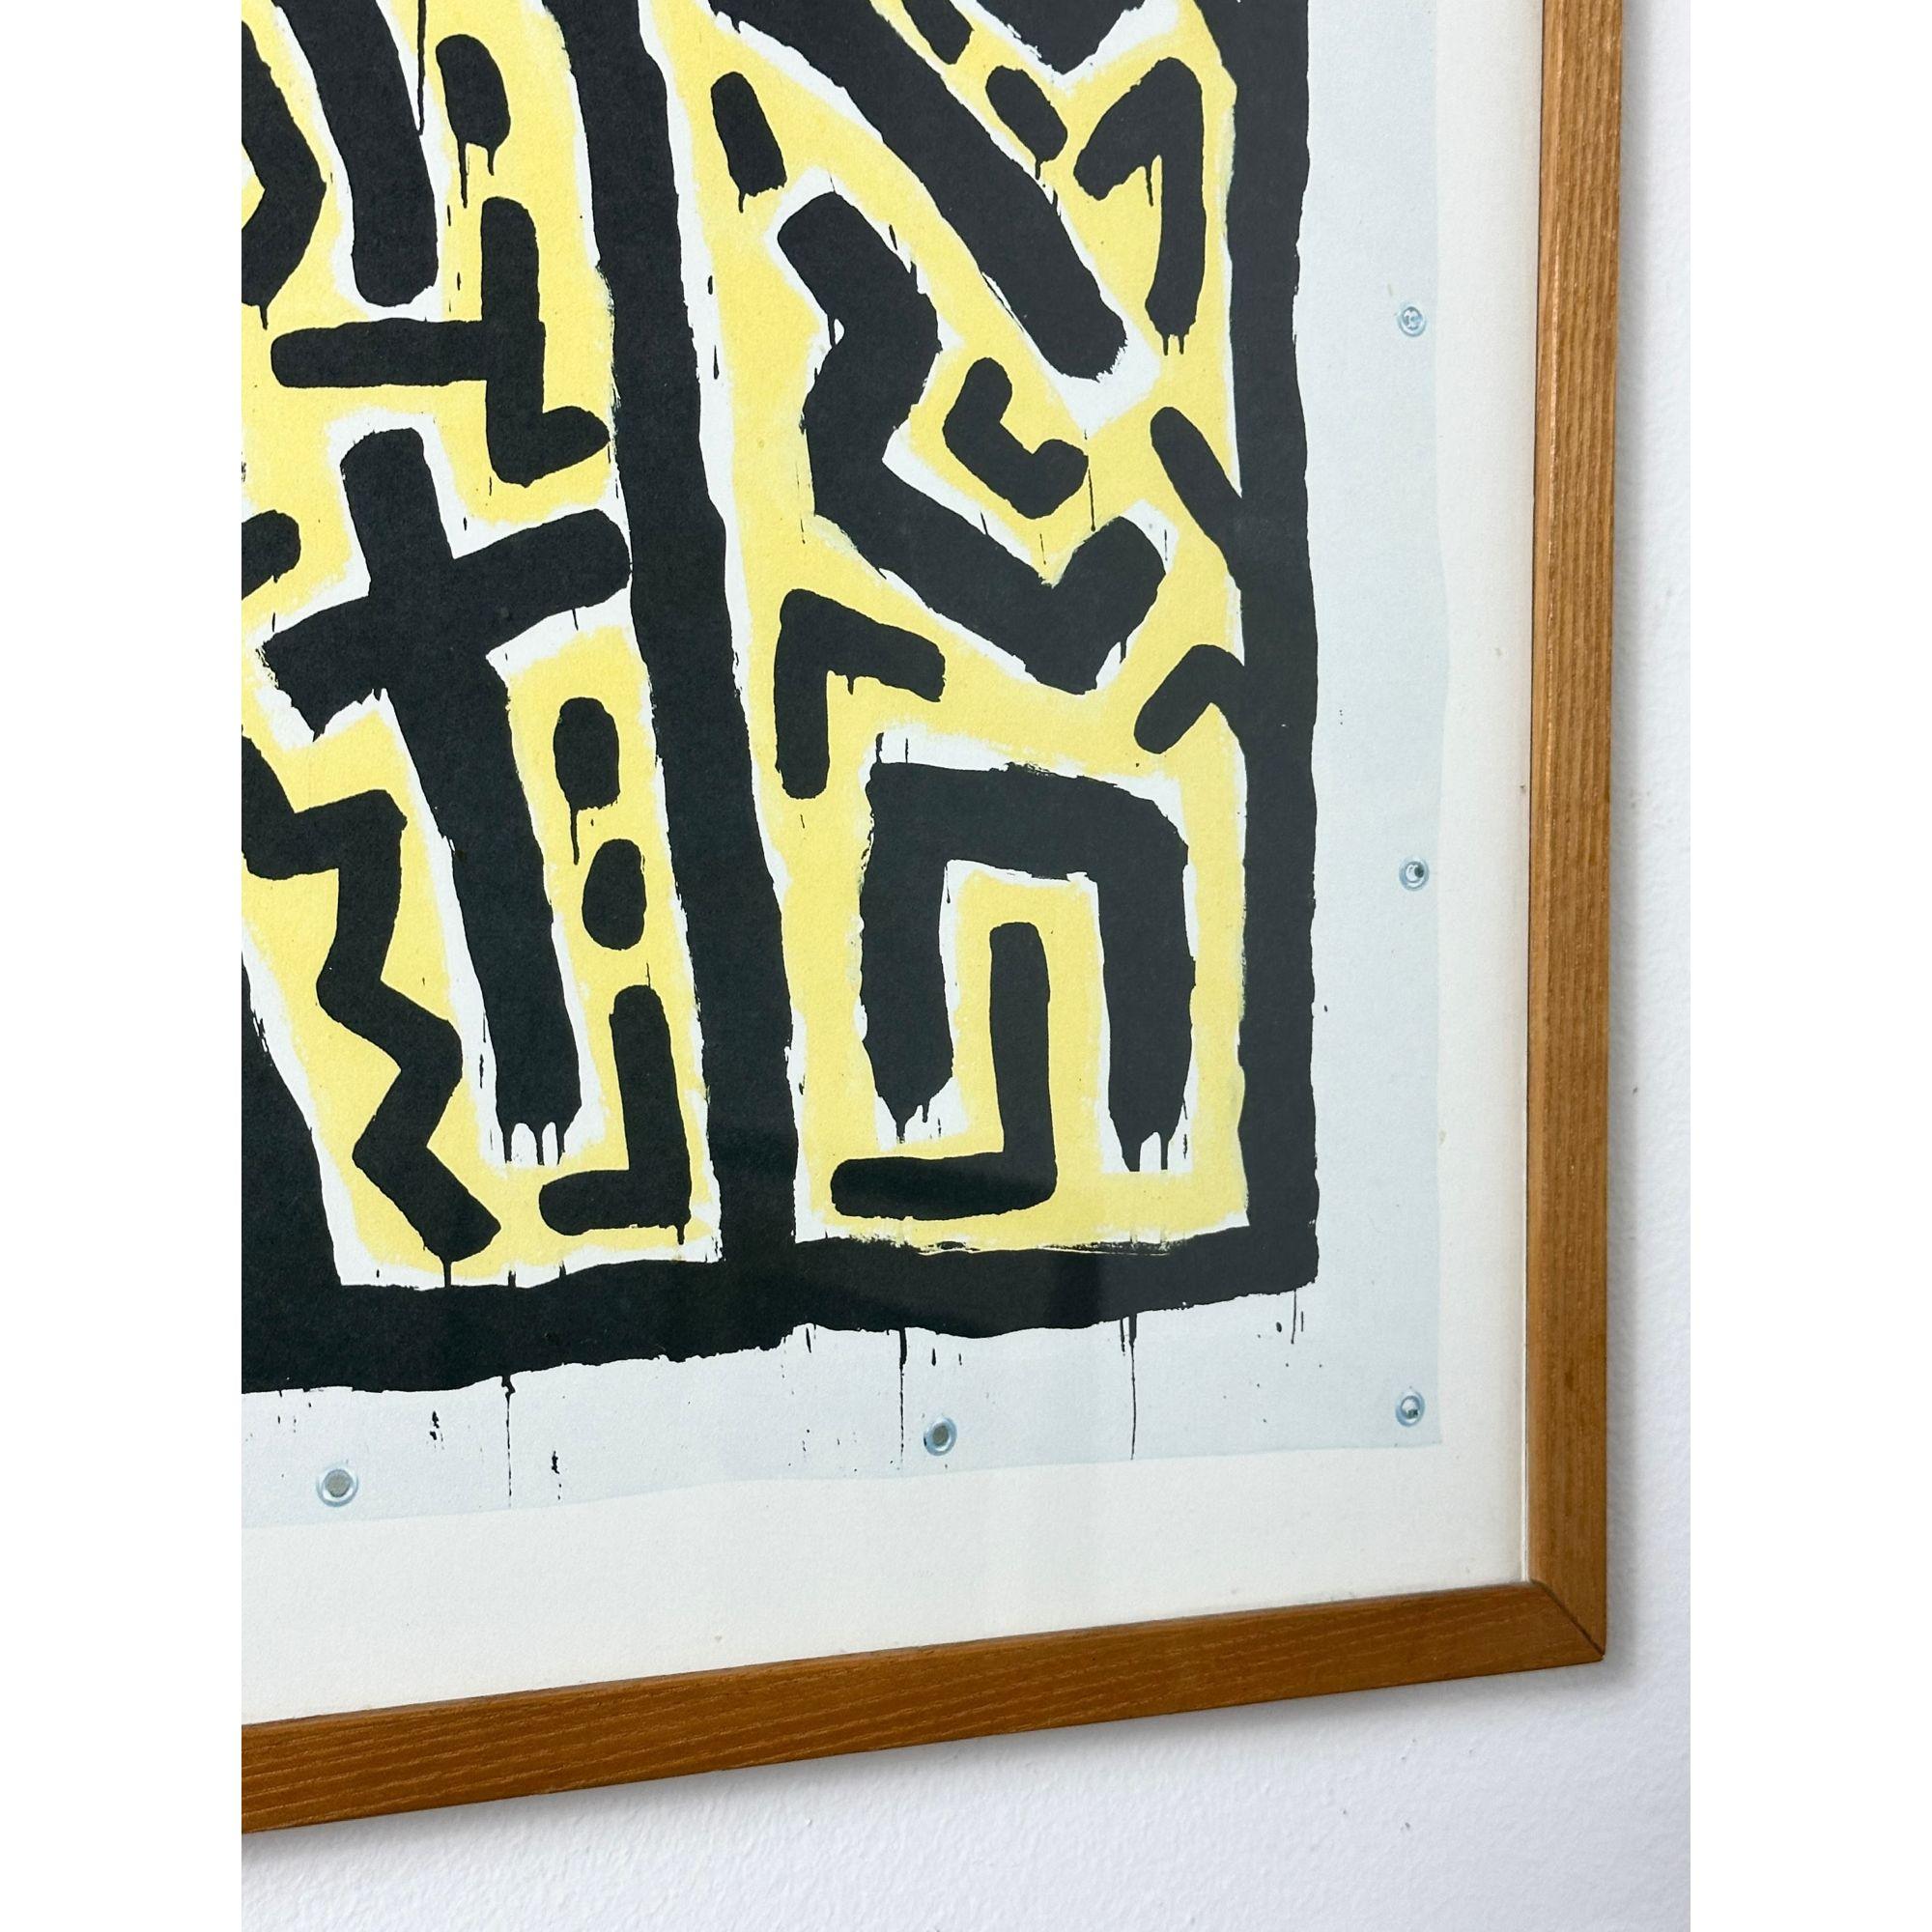 20th Century Pop Art Two Figures and Heart Abstract Framed Print by Keith Haring 1982 For Sale